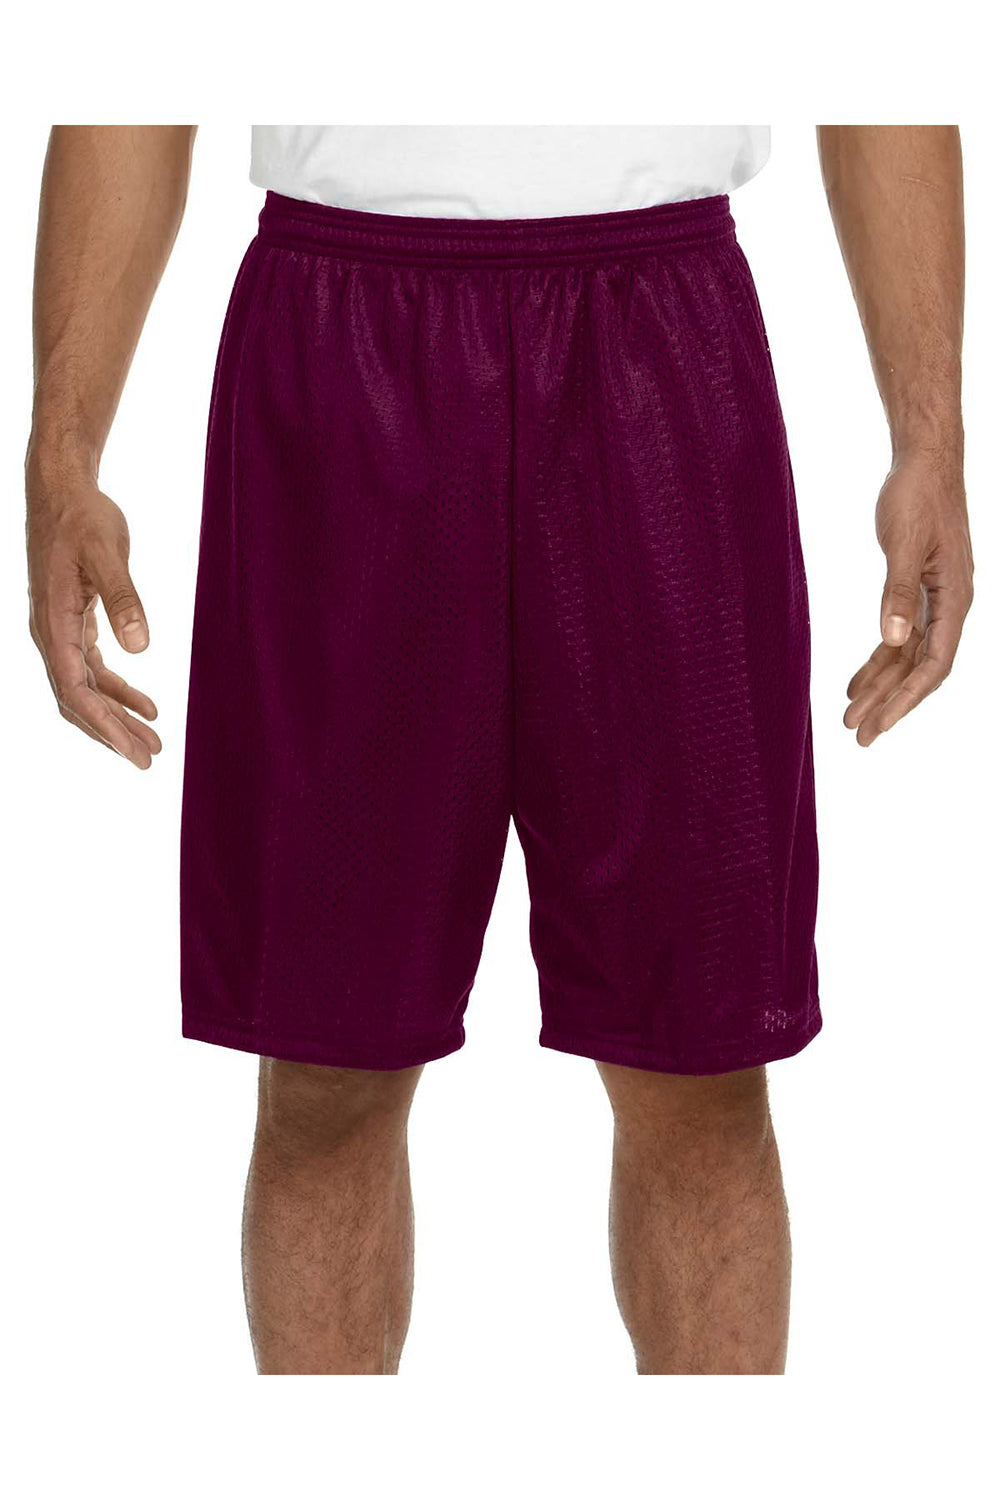 A4 N5296 Mens Moisture Wicking Tricot Mesh Shorts Maroon Model Front